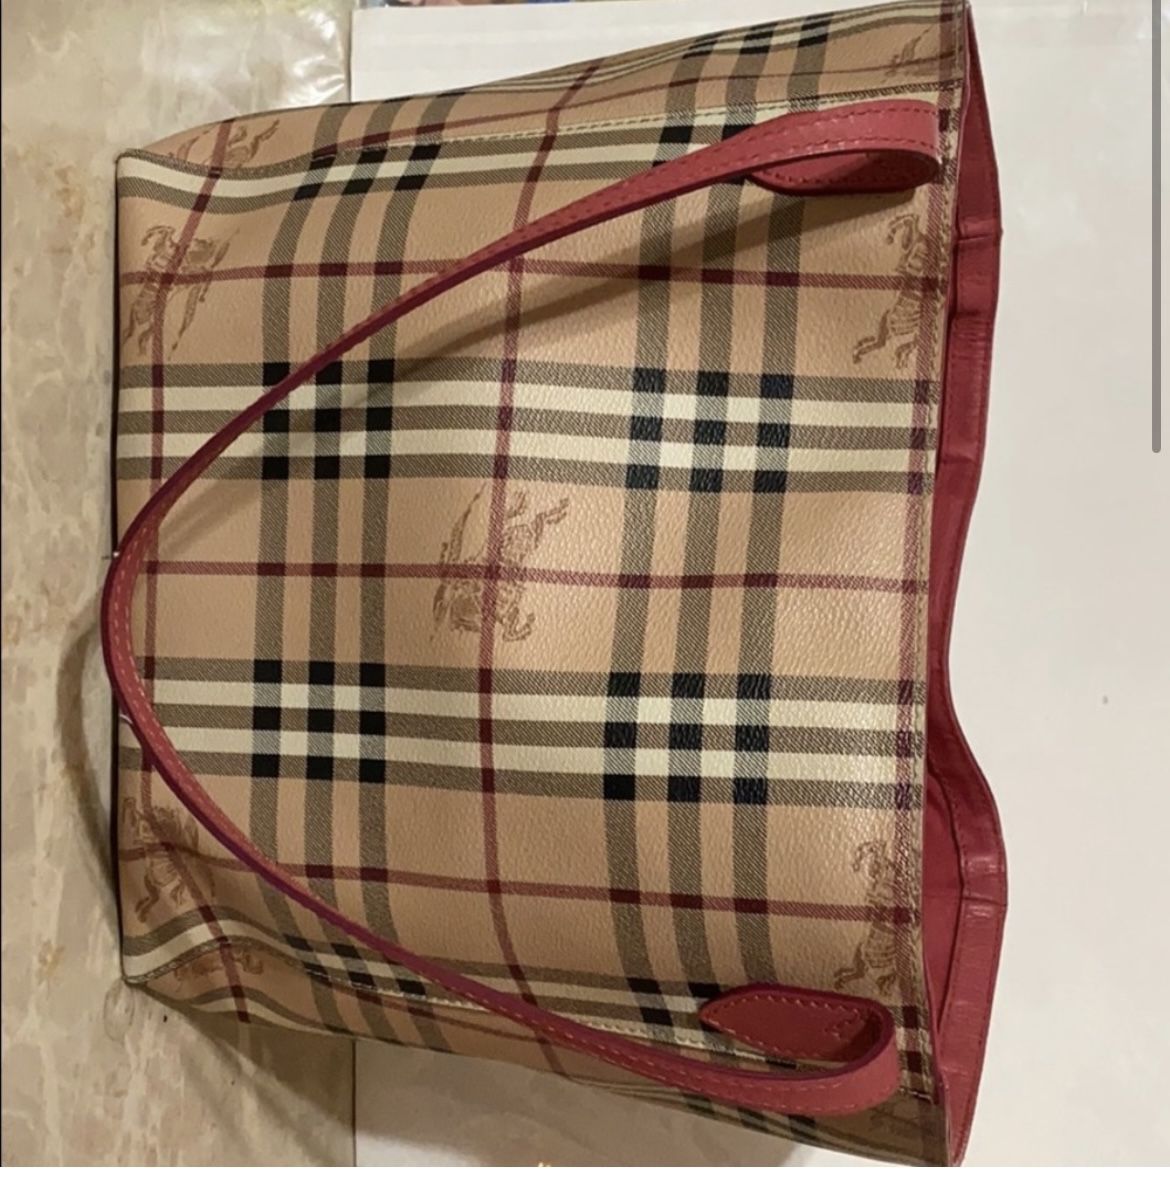 large burberry tote bags